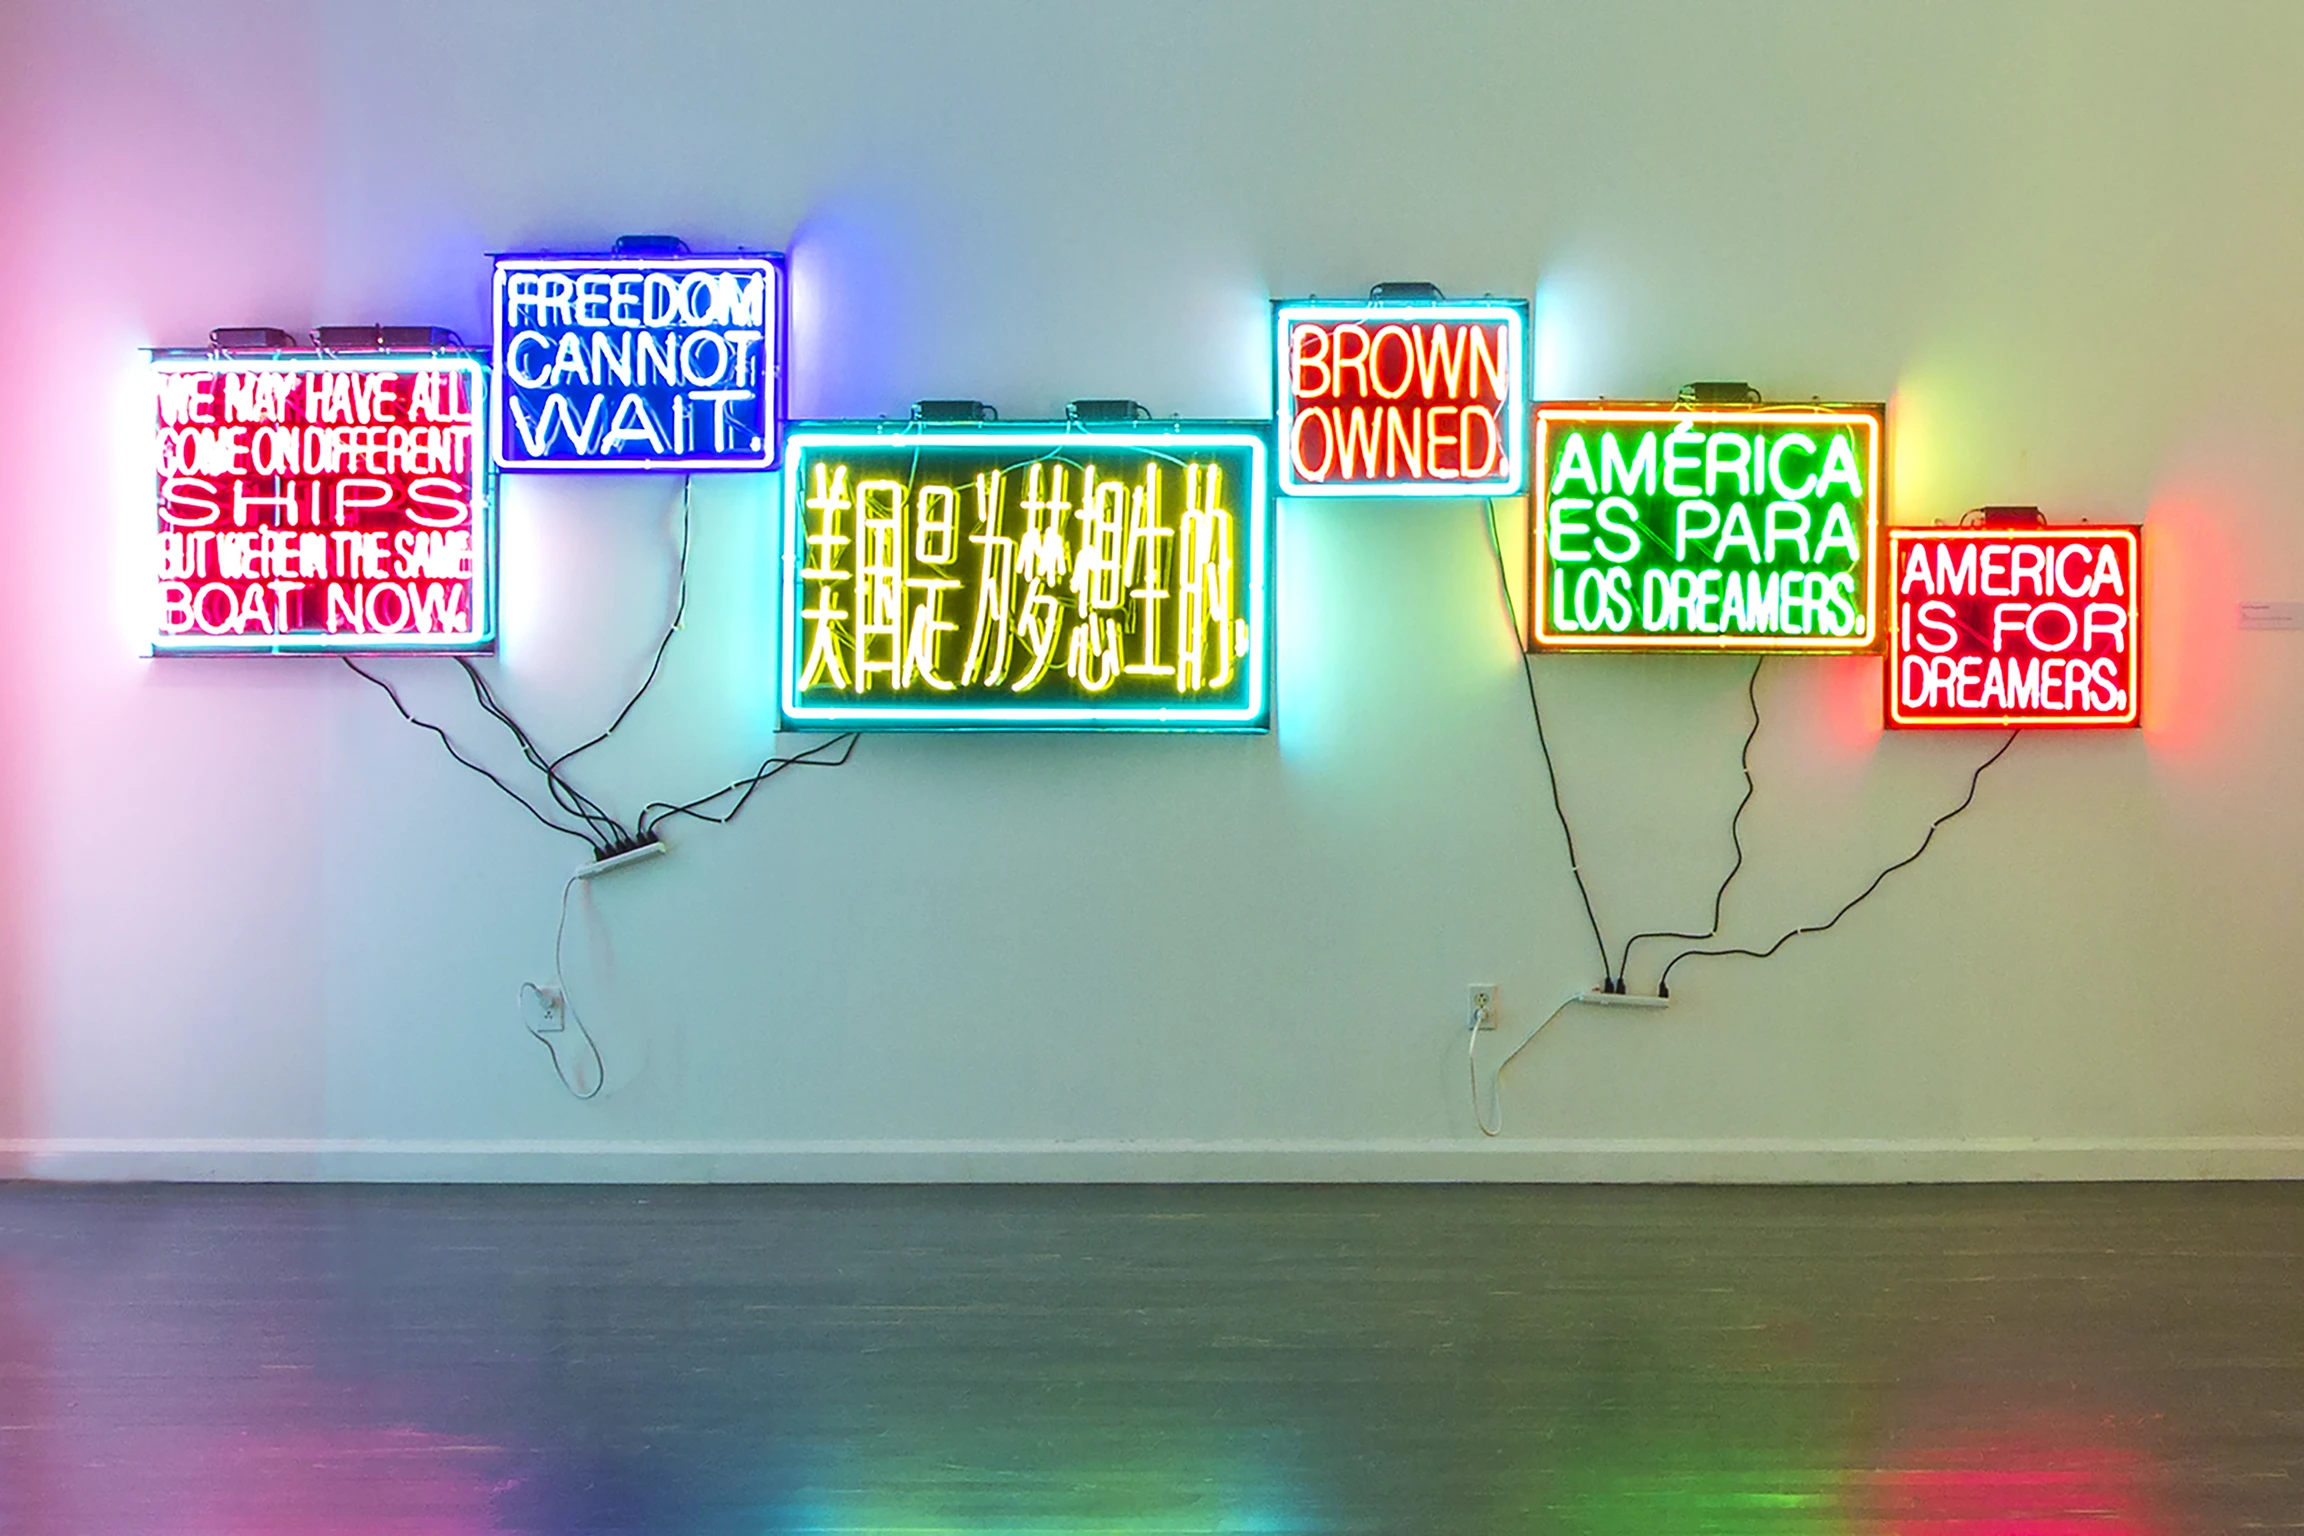 Five colorful neon signs hang on the wall with messages that include, "Freedom cannot wait," "Brown owned," and "America is for Dreamers."